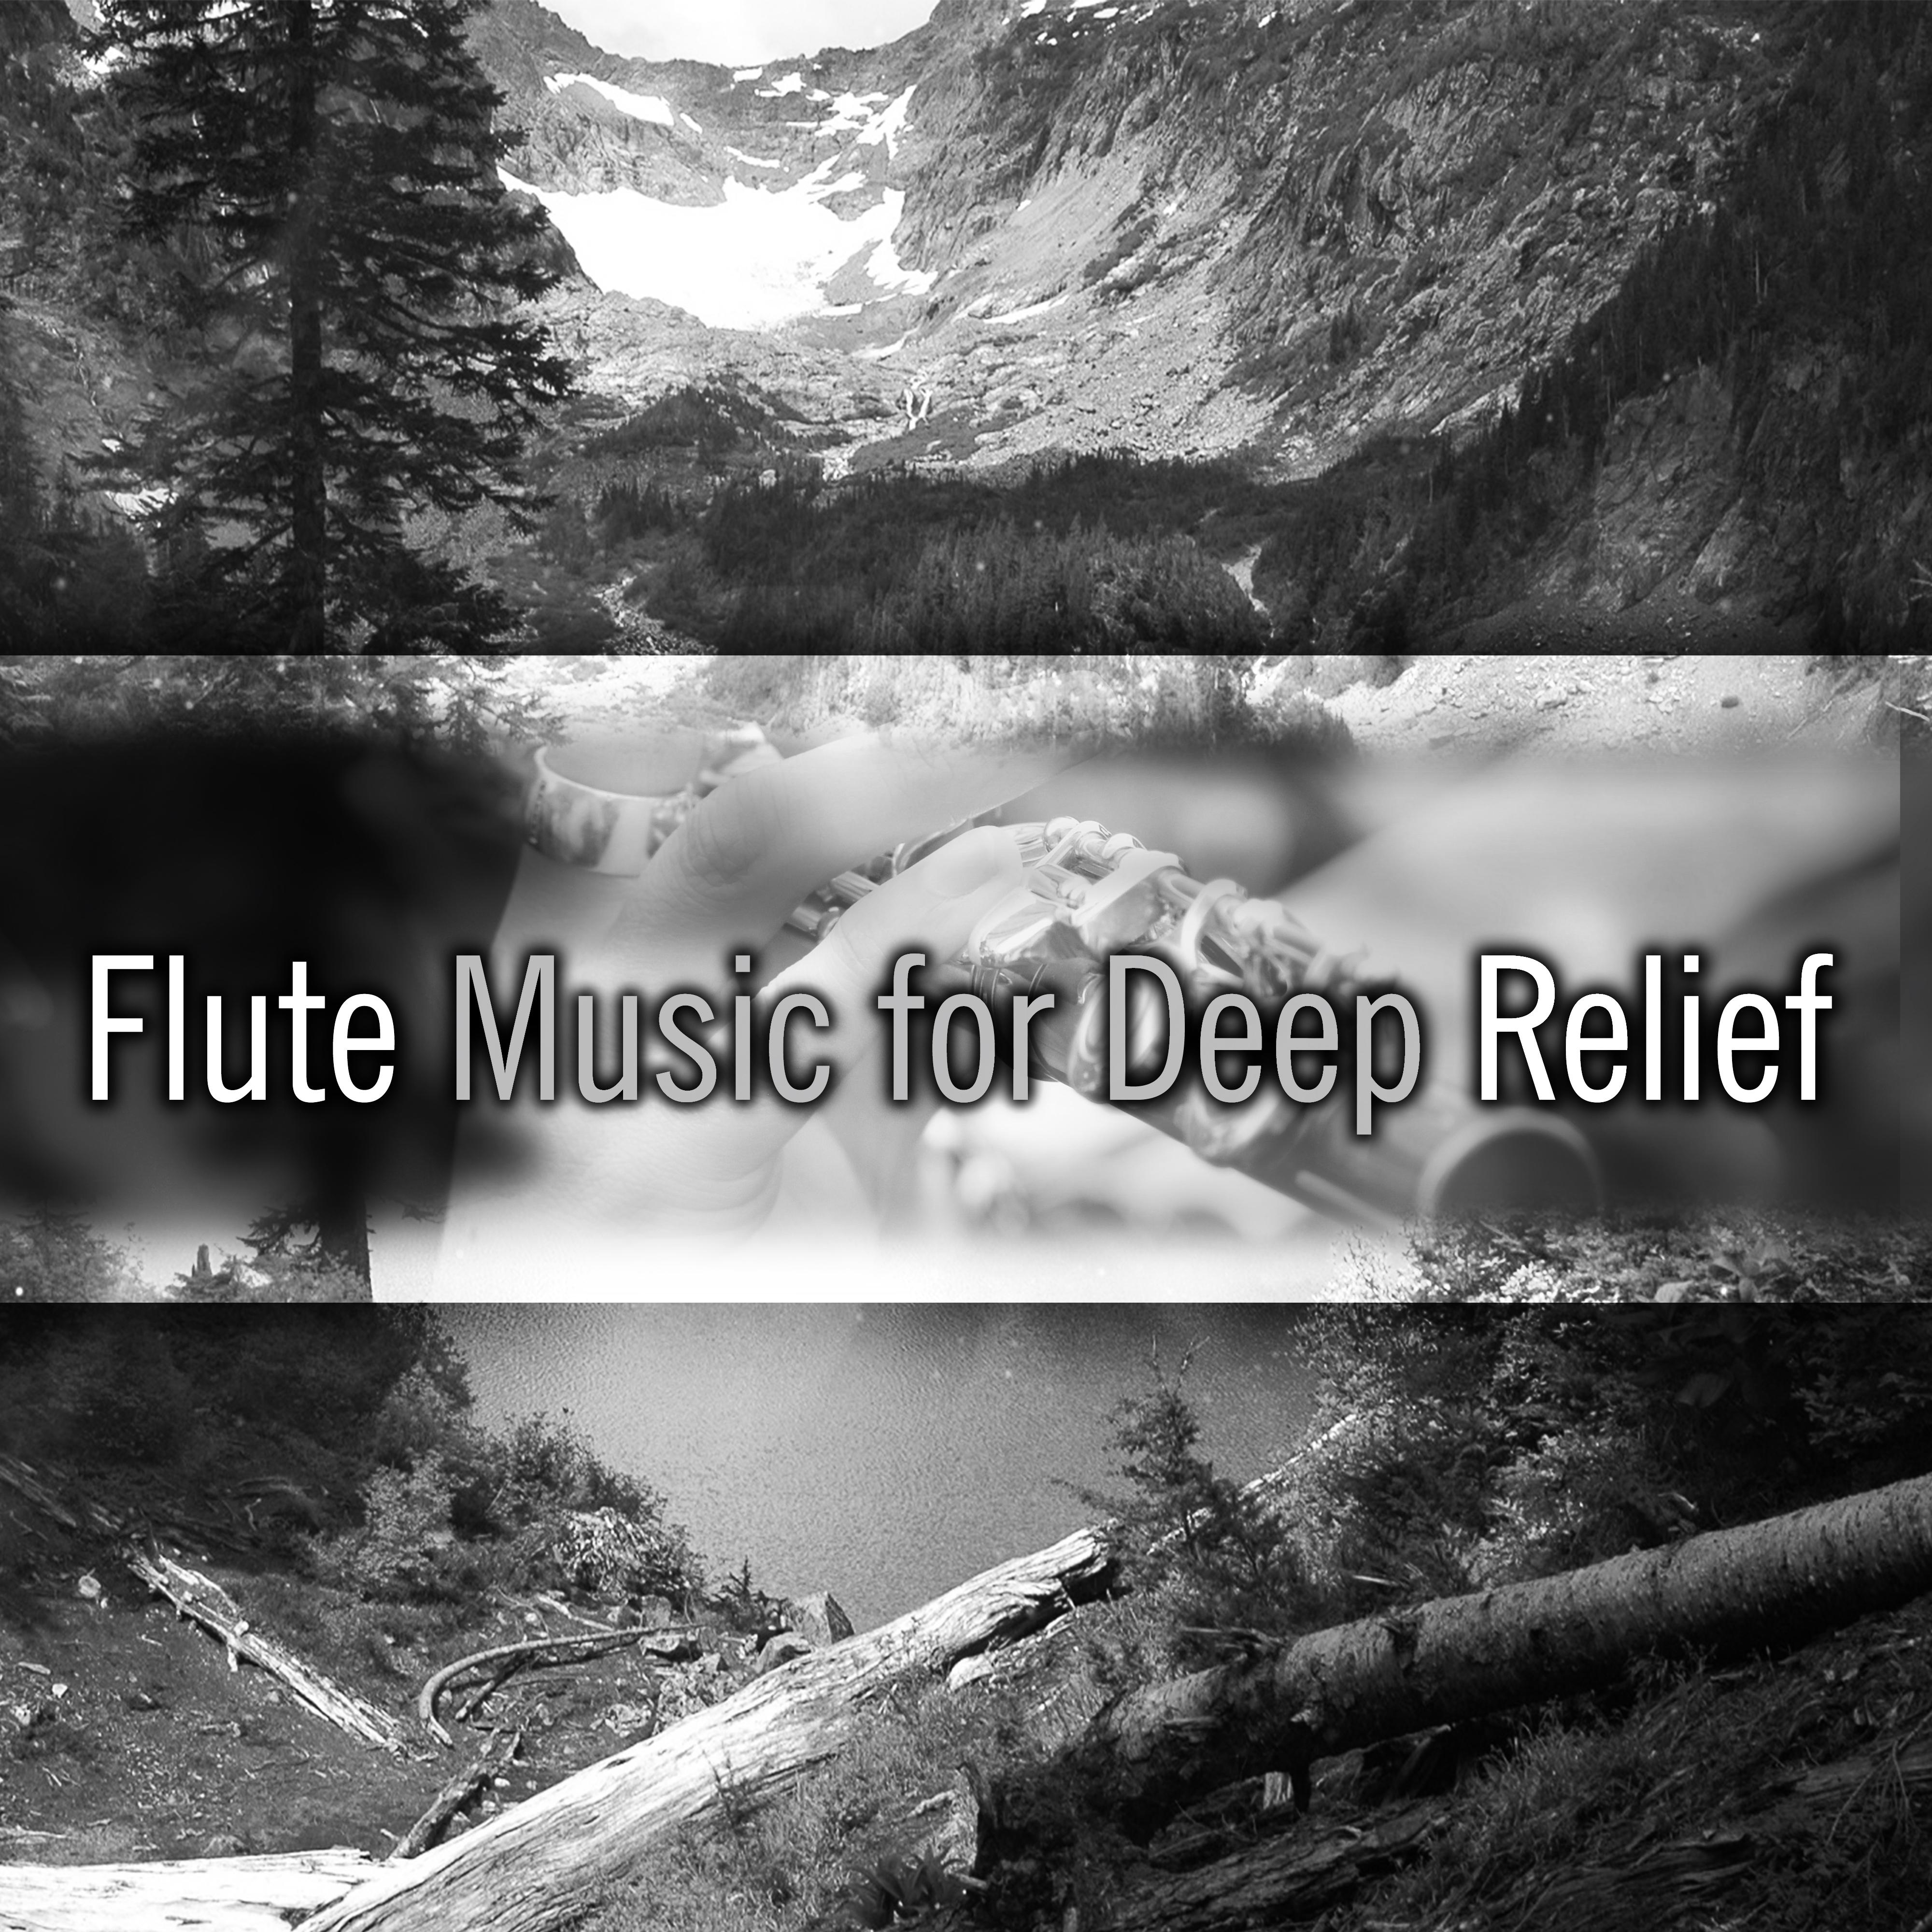 Flute Music for Deep Relief – Nature Sounds for Relaxation, Soothing Piano, Stress Relief, Birds Songs, Peaceful Music